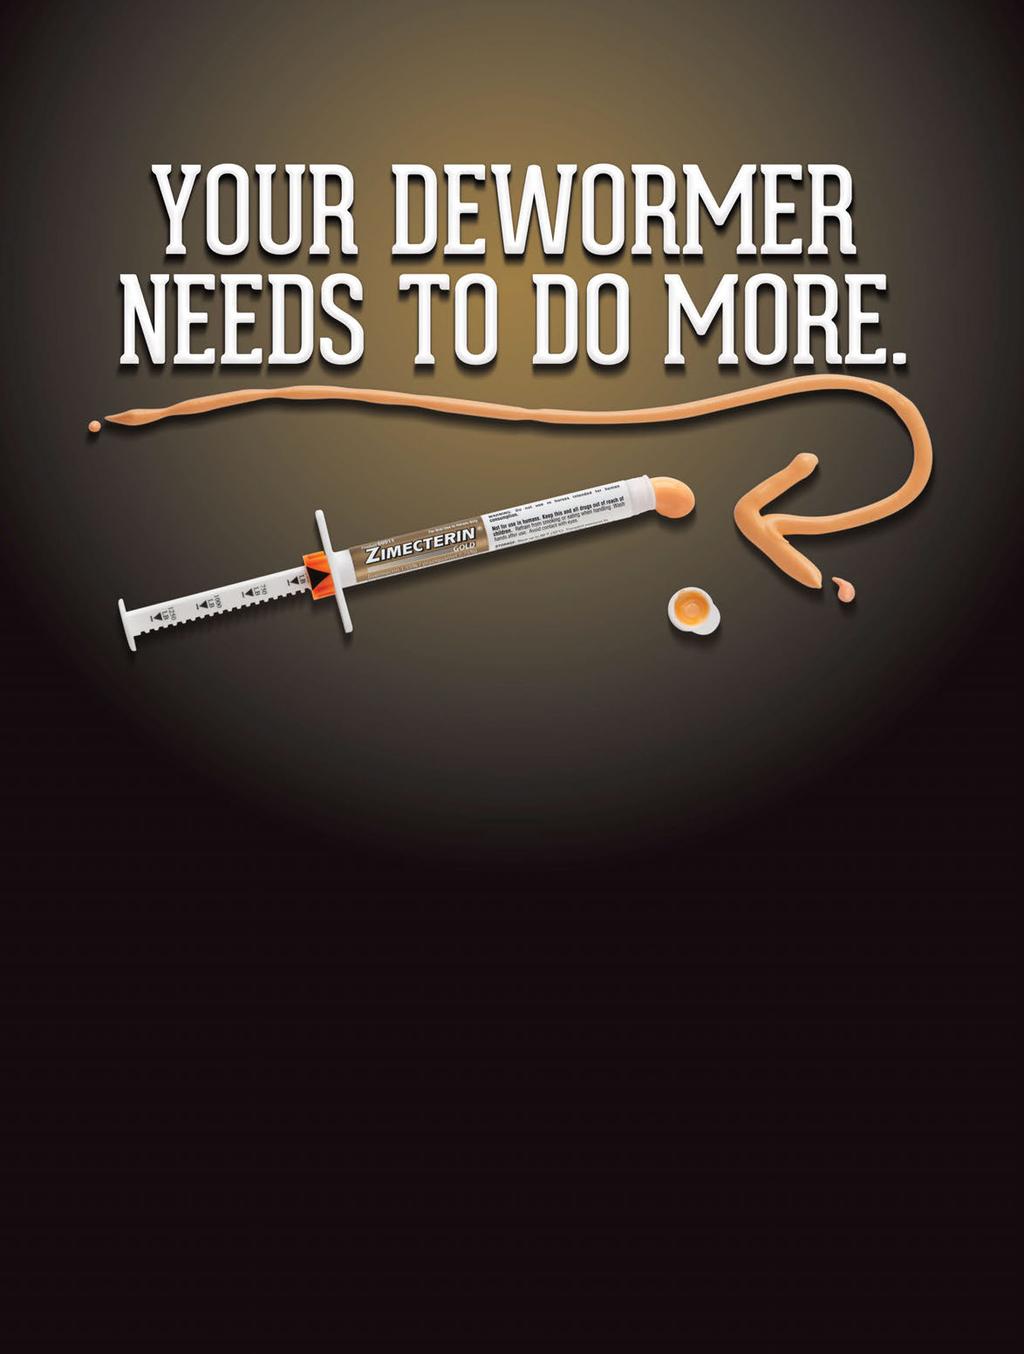 Deworming strategies have changed, so talk to your veterinarian.